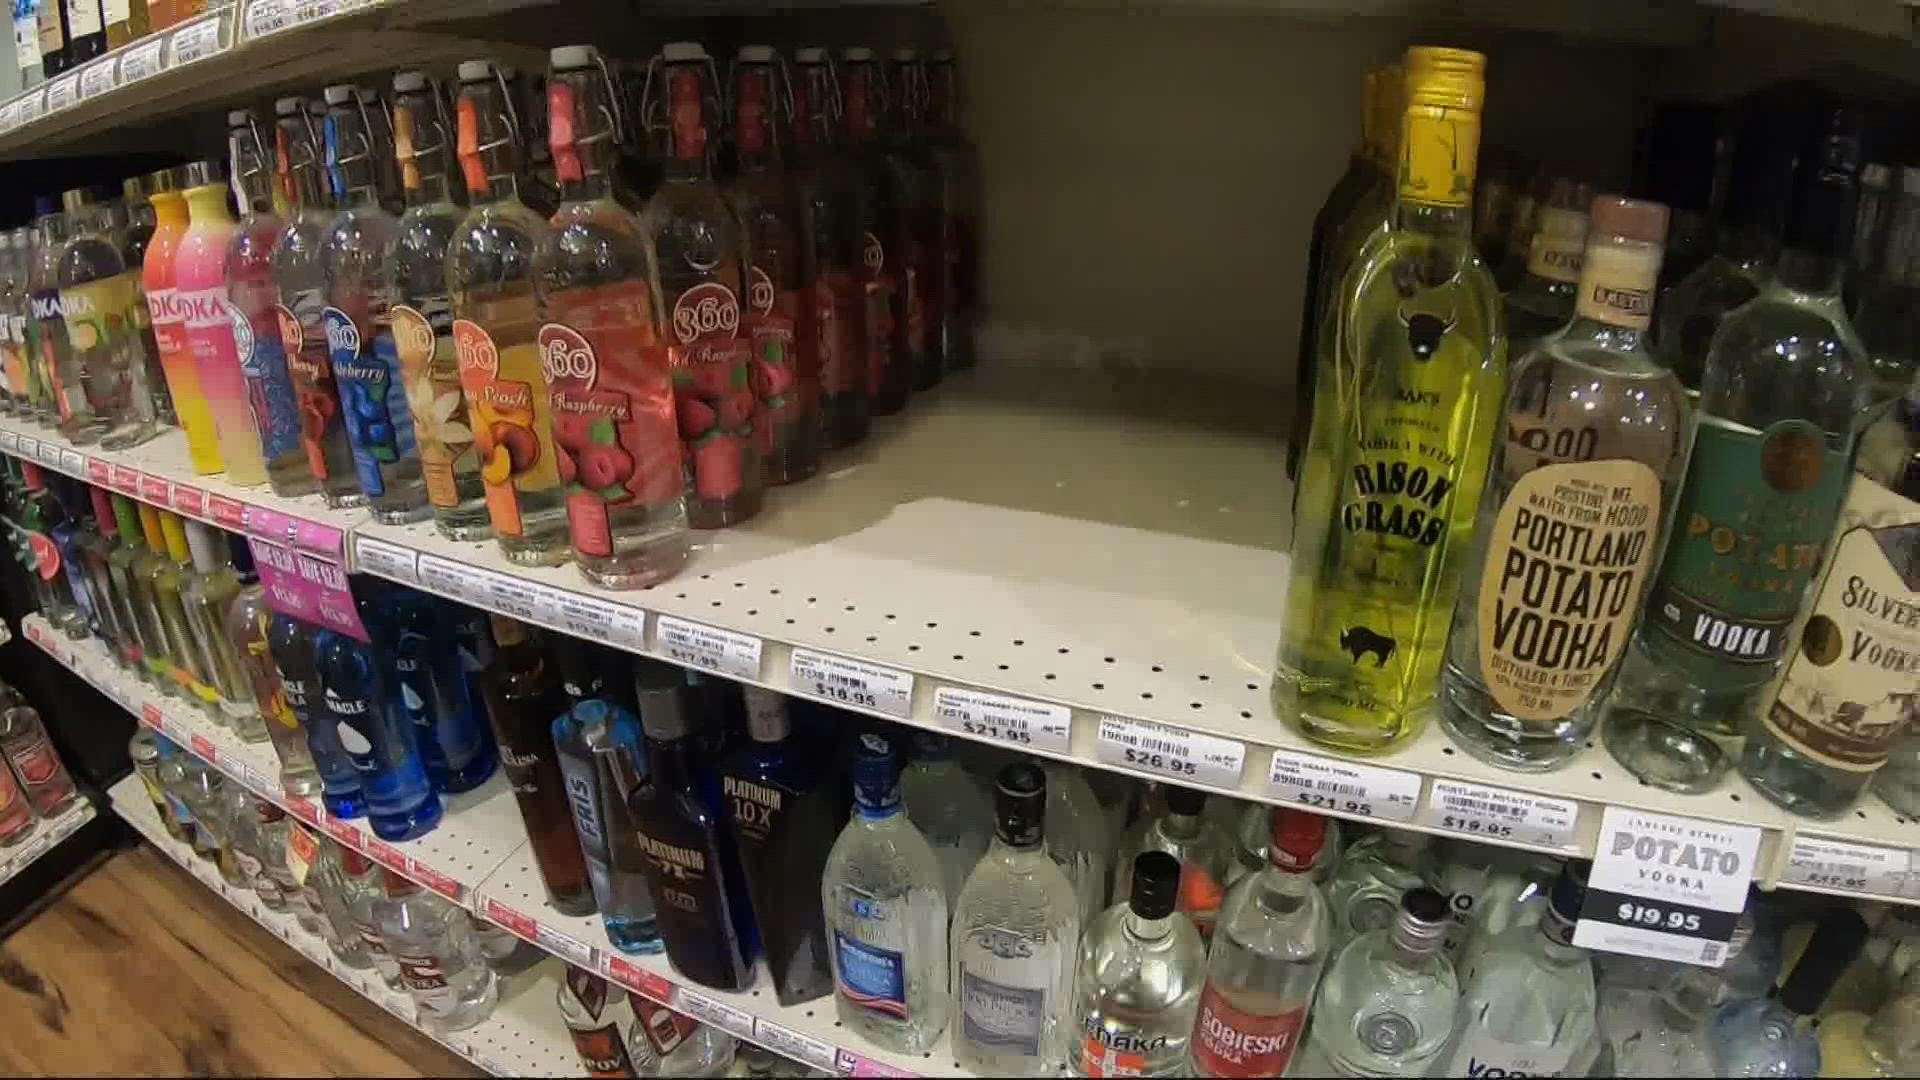 OLCC sent out messaging to all Oregon liquor stores to cease selling Russian-made spirits in support of Ukraine.